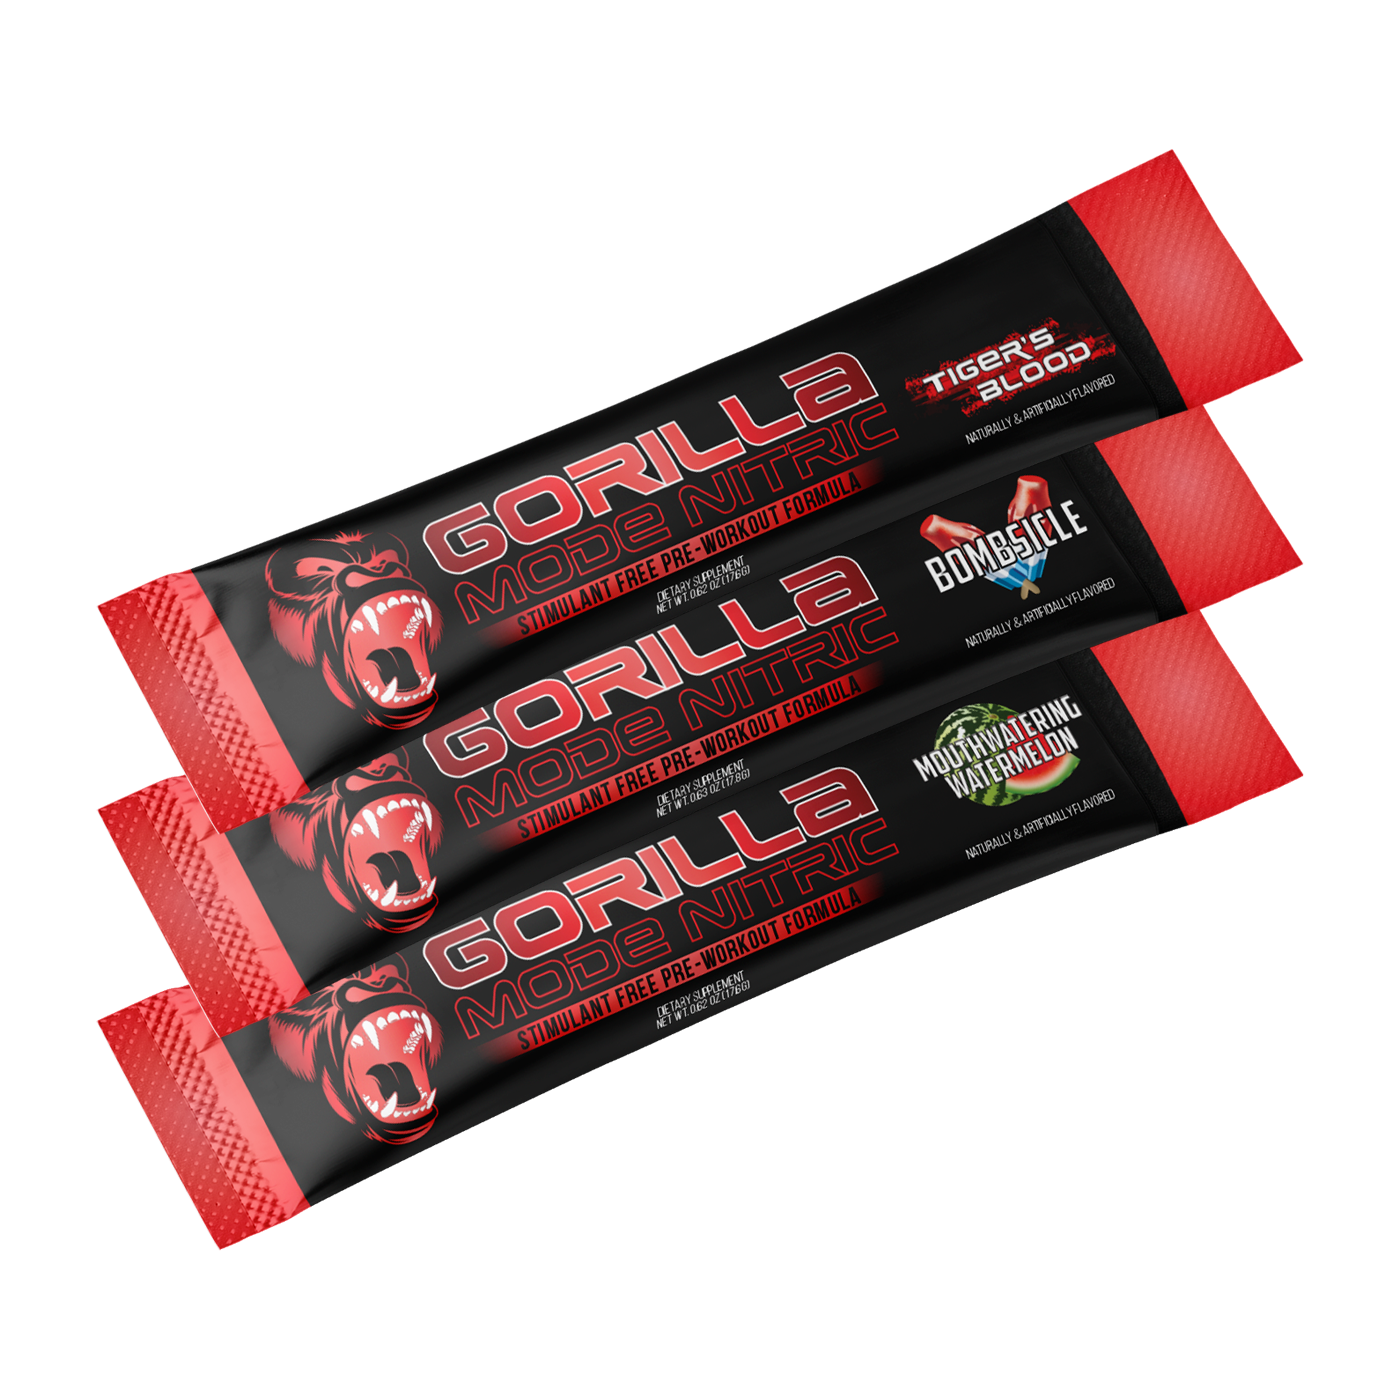 Gorilla Mode Nitric Stimulant Free Pre-Workout Best Tasting and Most  Effective Stimulant Free Pre-Workout/Massive Pumps Vasodilation Power / 646  Grams (Bombsicle)